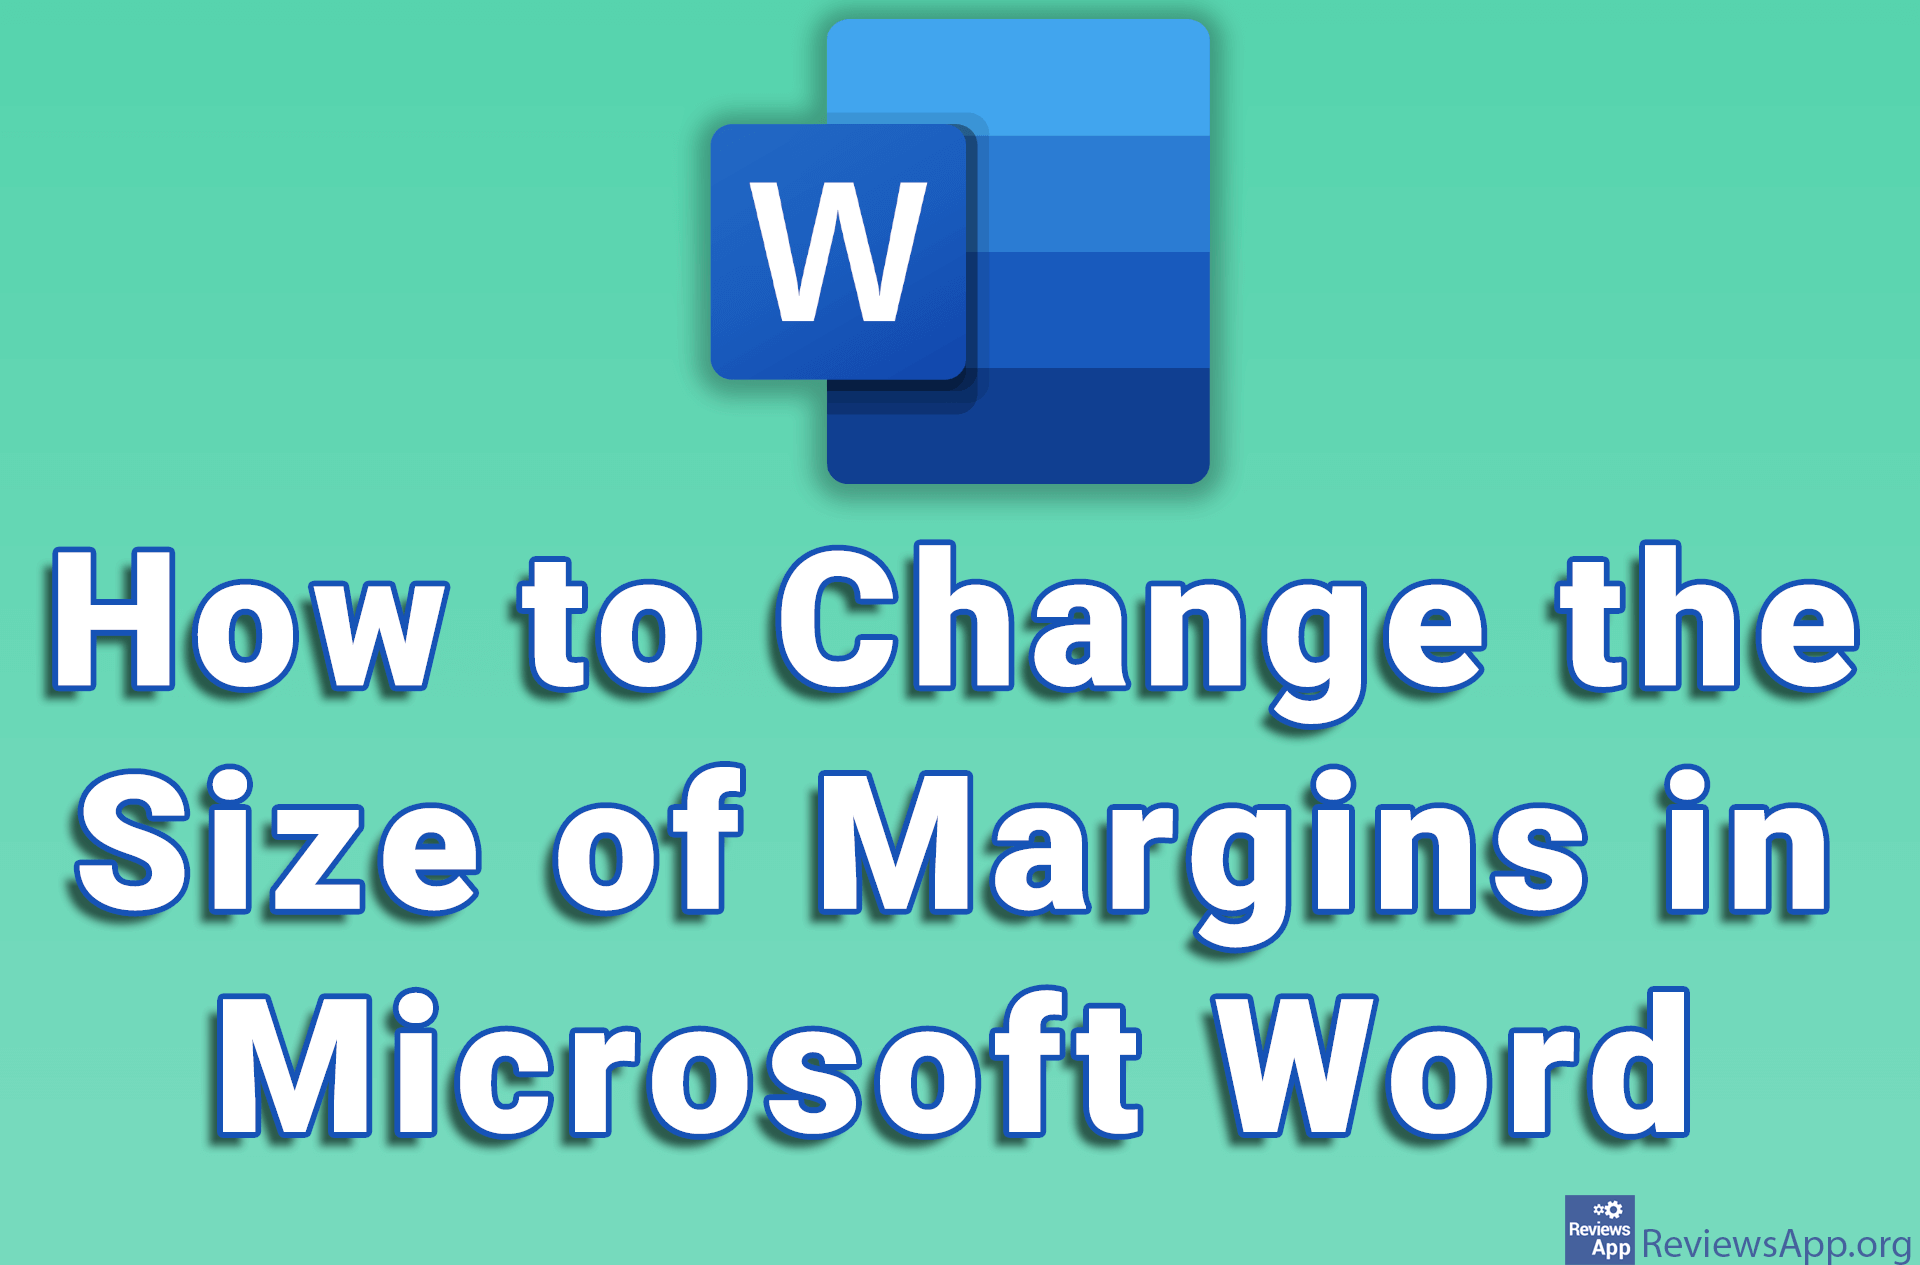 How to Change the Size of Margins in Microsoft Word